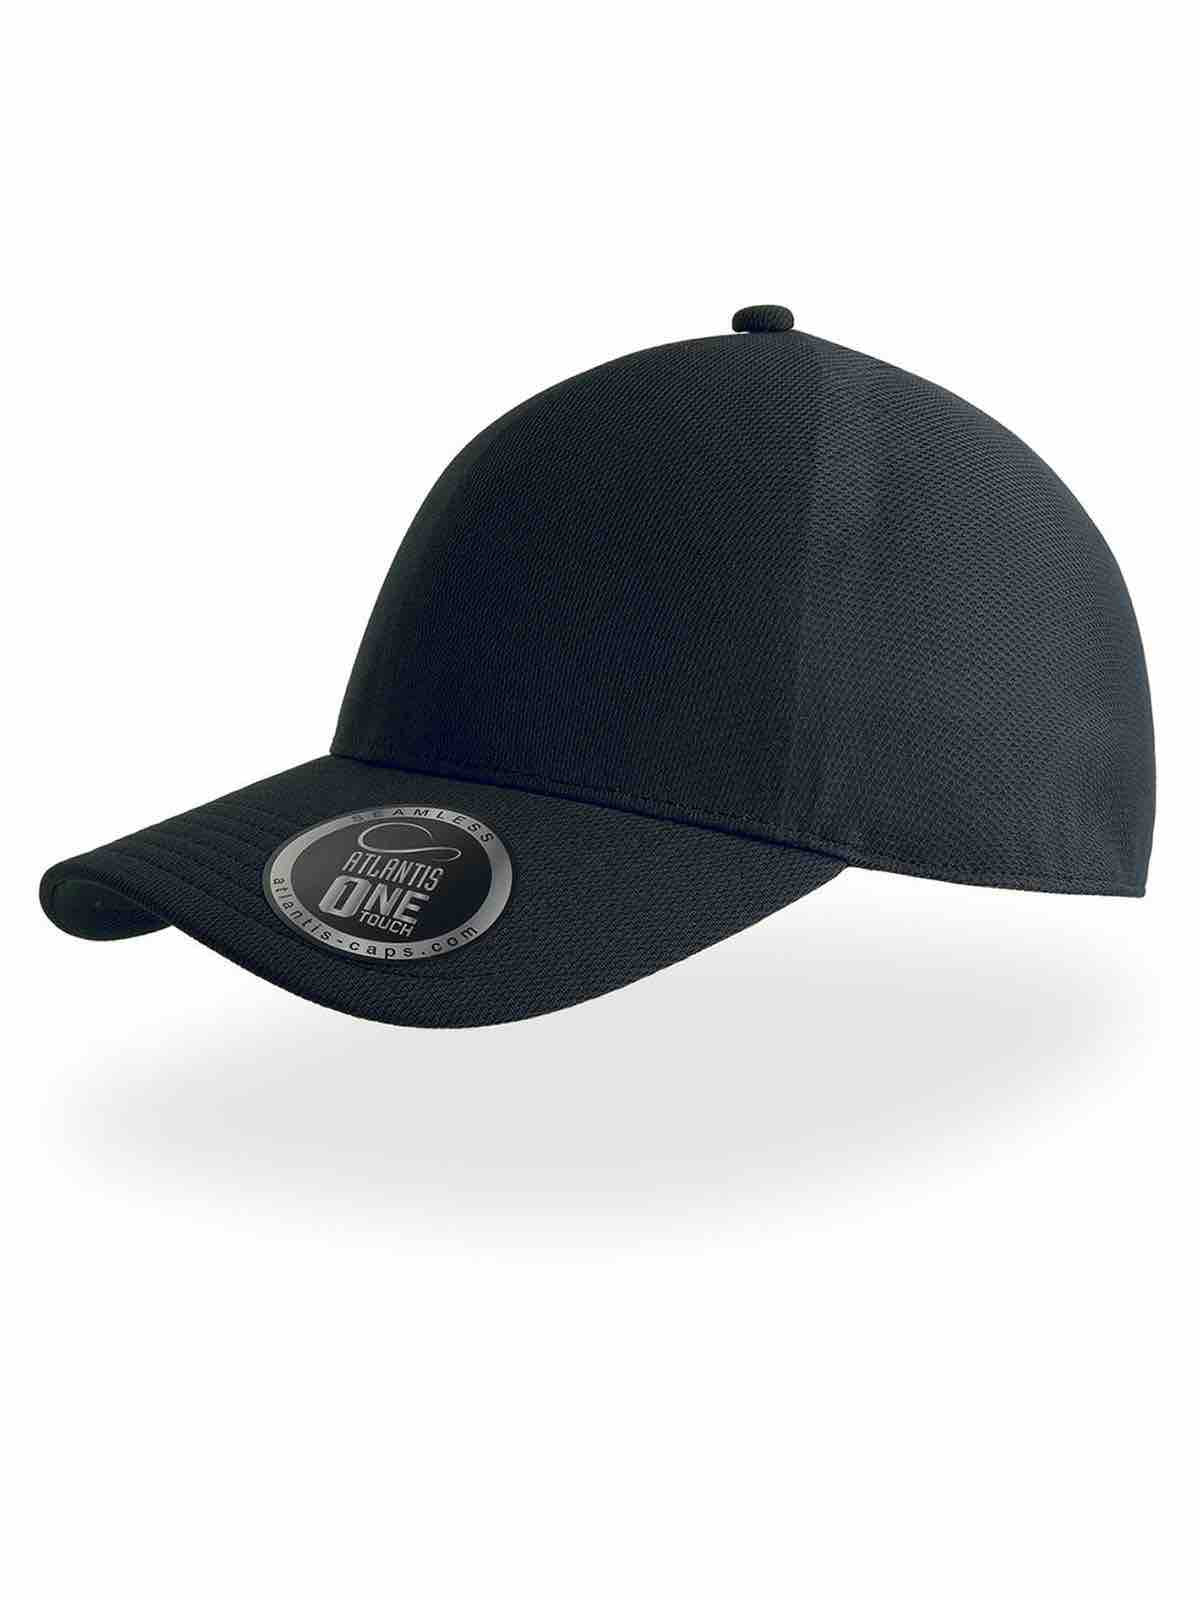 Gorra de Golf One-Touch personalizable negra  WE SPORTED